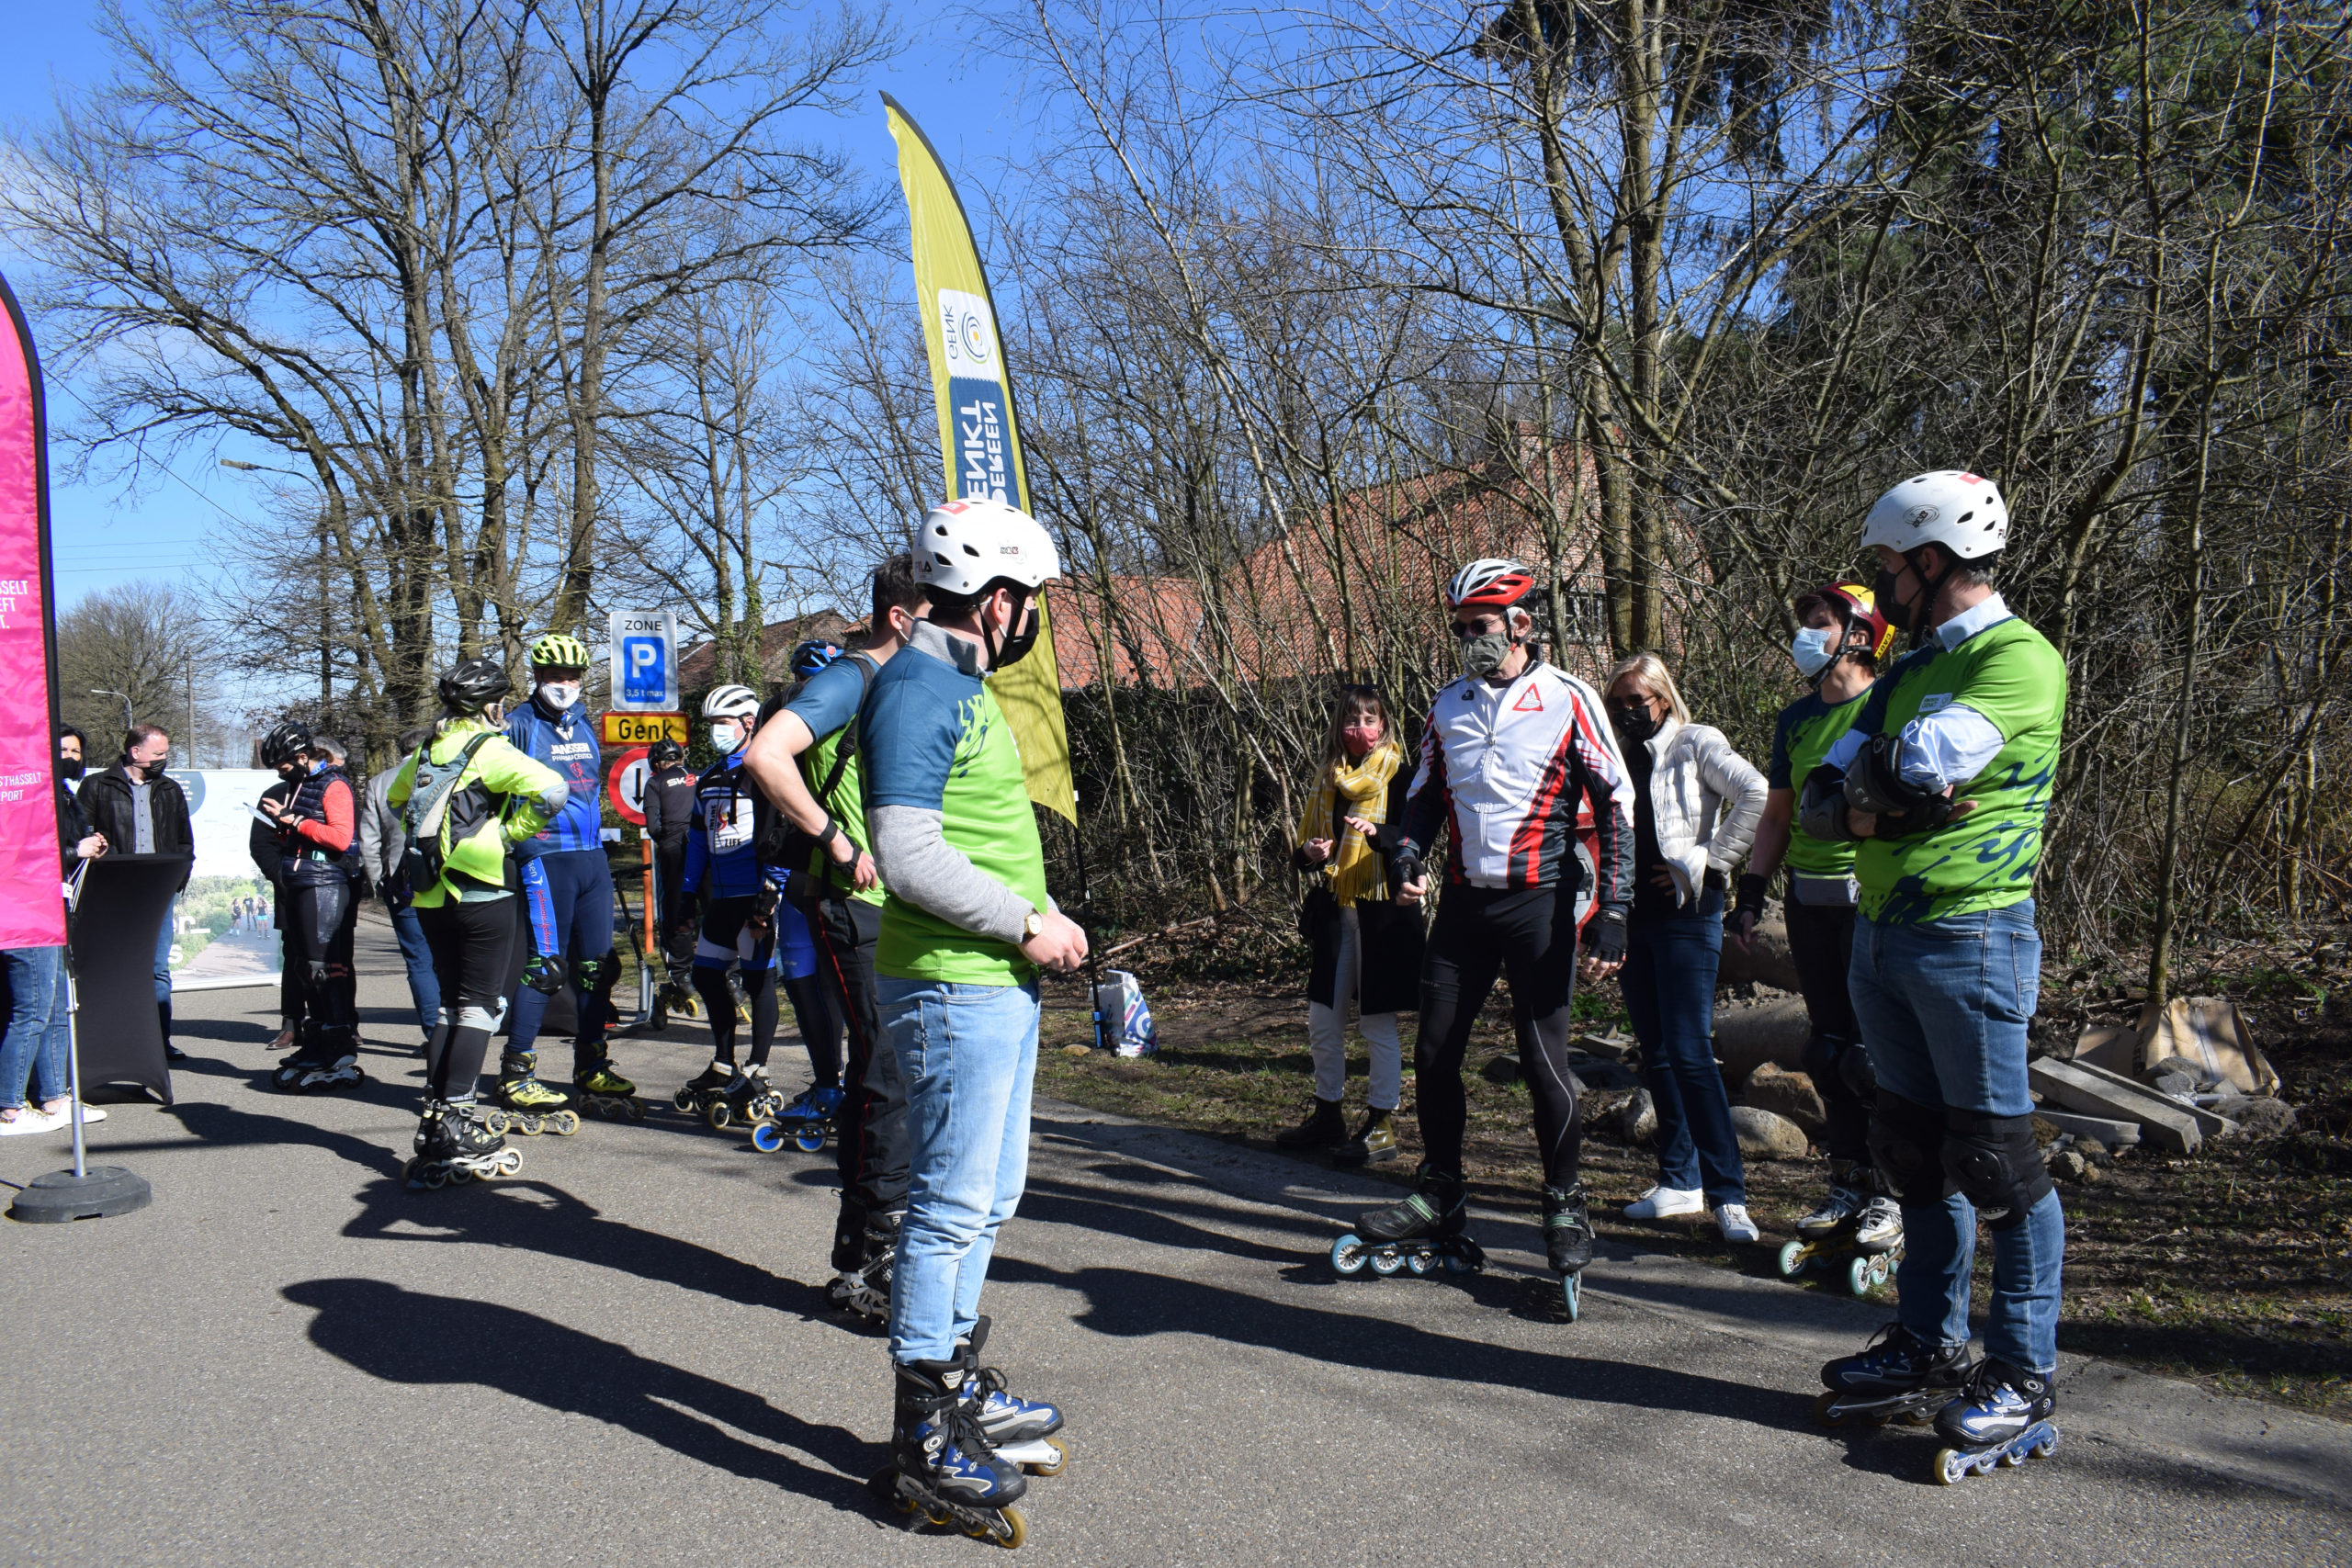 First 90-km long rollerblade route links Genk and Hasselt